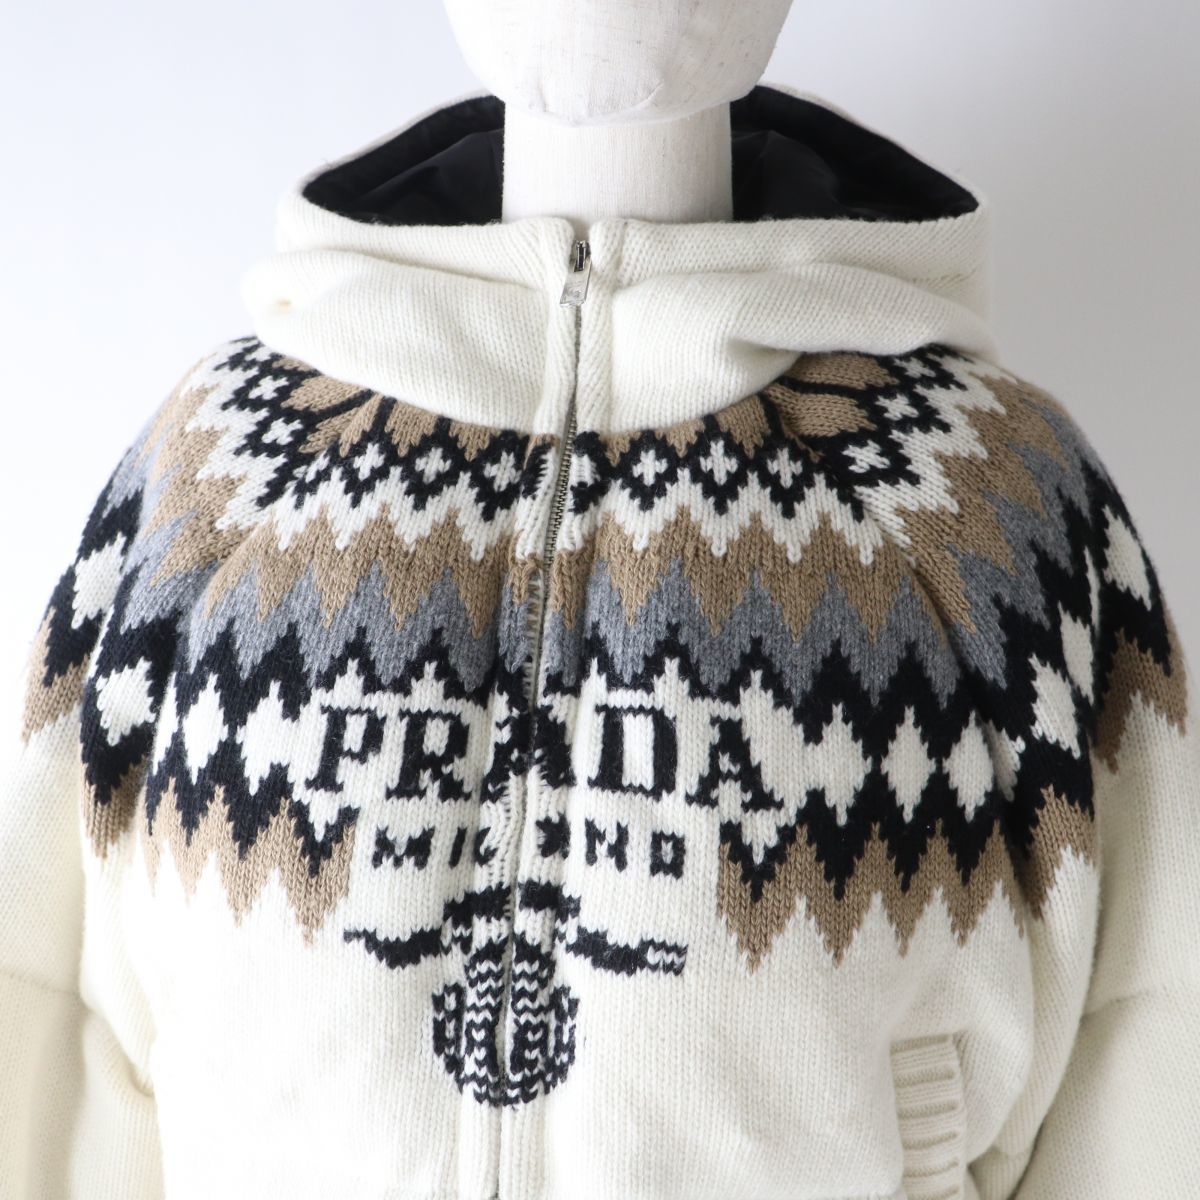  ultimate beautiful * regular goods .572000 jpy made in Italy PRADA Prada 292029 lady's cashmere . with a hood . knitted down jacket nordic pattern 36 tag attaching 